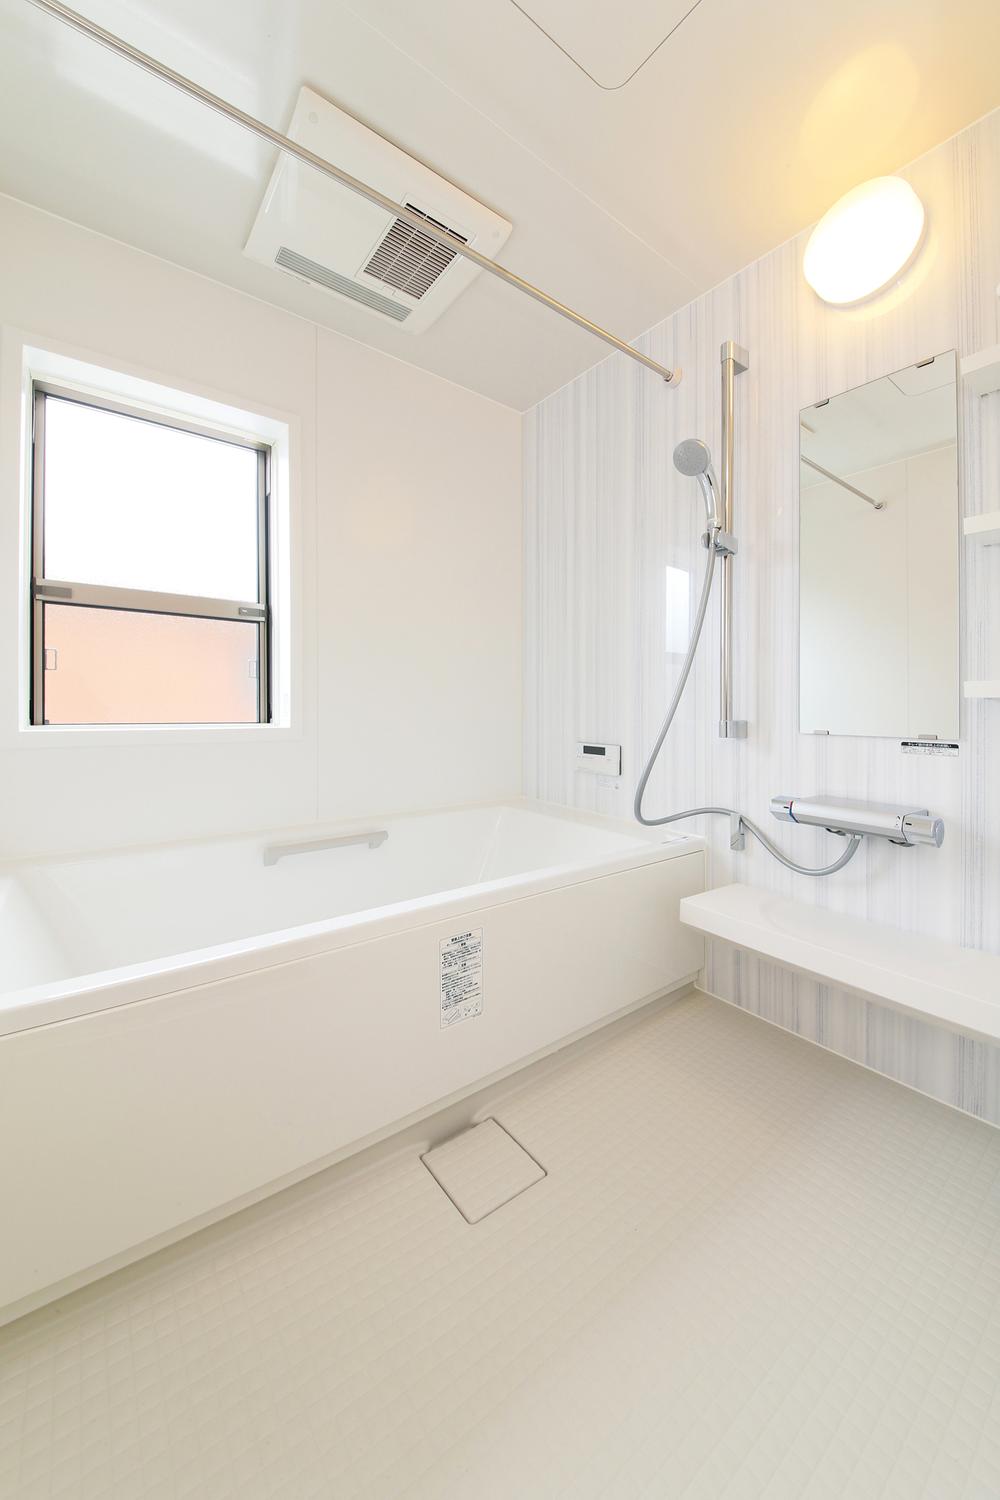 Same specifications photo (bathroom). Cleaning also Easy of Kururin poi you can bathe to be having to worry about the time in the different families of bathing time Samobasu ・ Clean bathtub ・ Kireidoa ・ Thermo is the floor etc .. nice feature packed